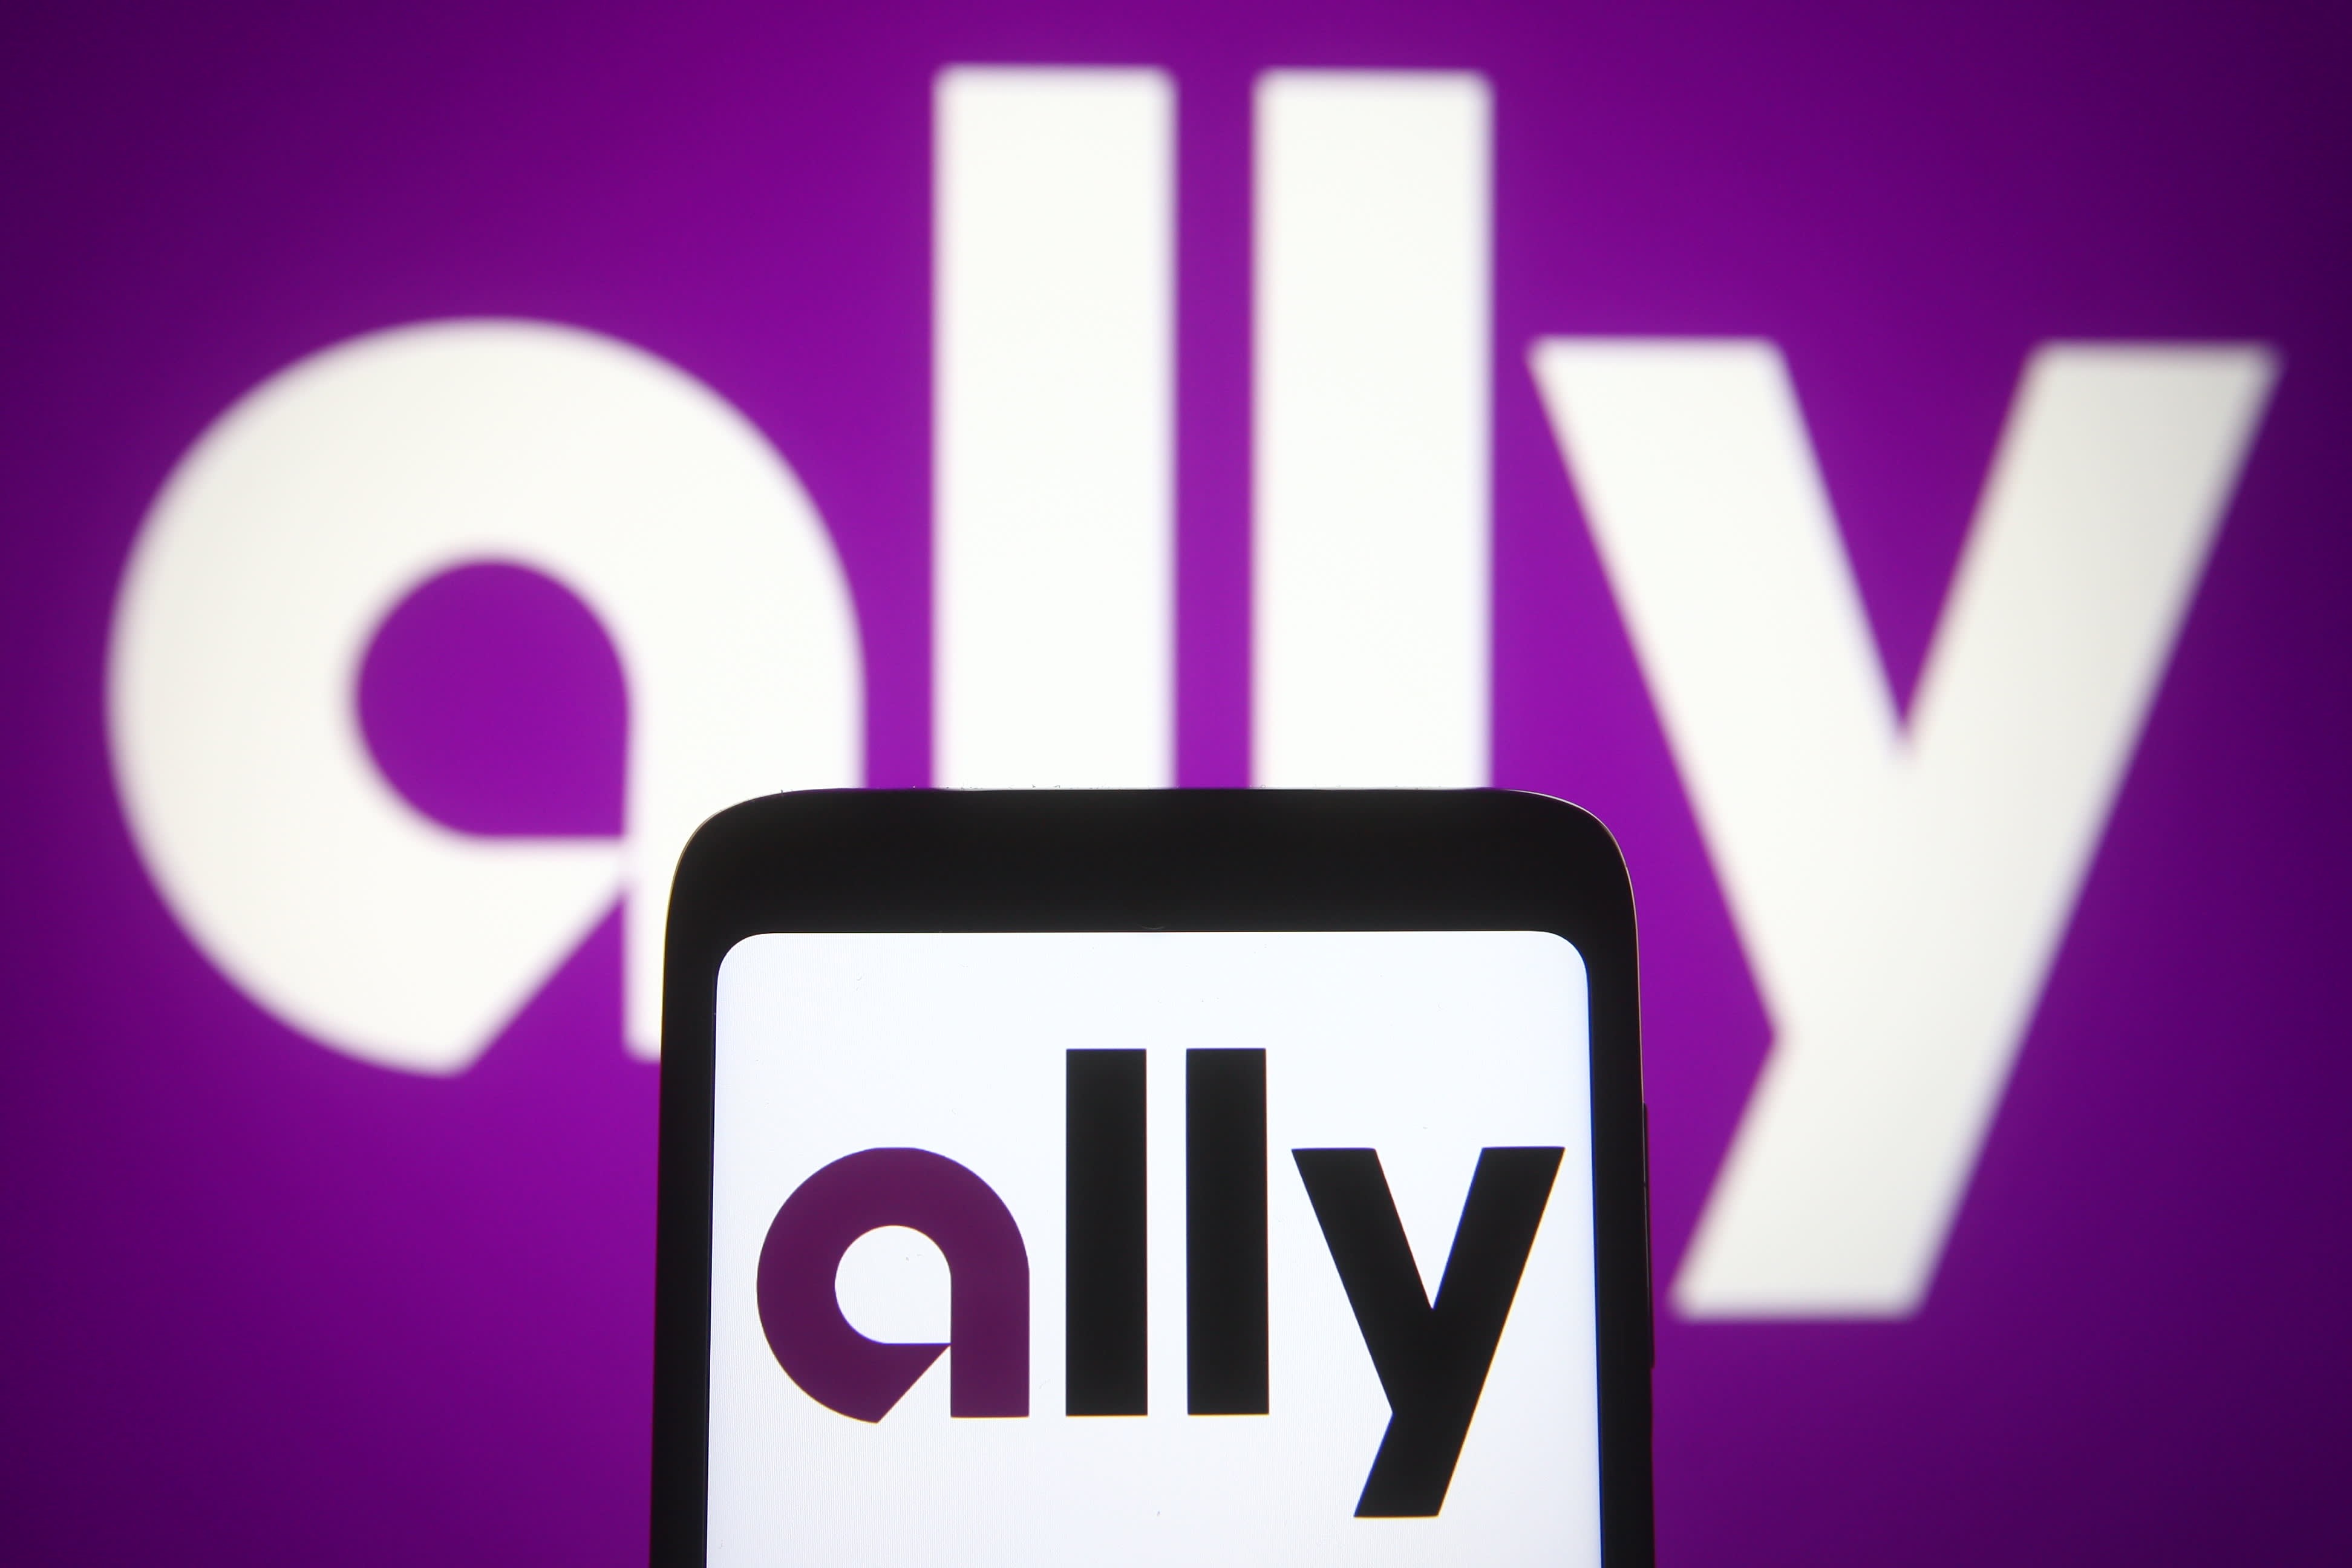 Sell Ally Financial as shares could fall nearly 30% from here, Morgan Stanley says in downgrade